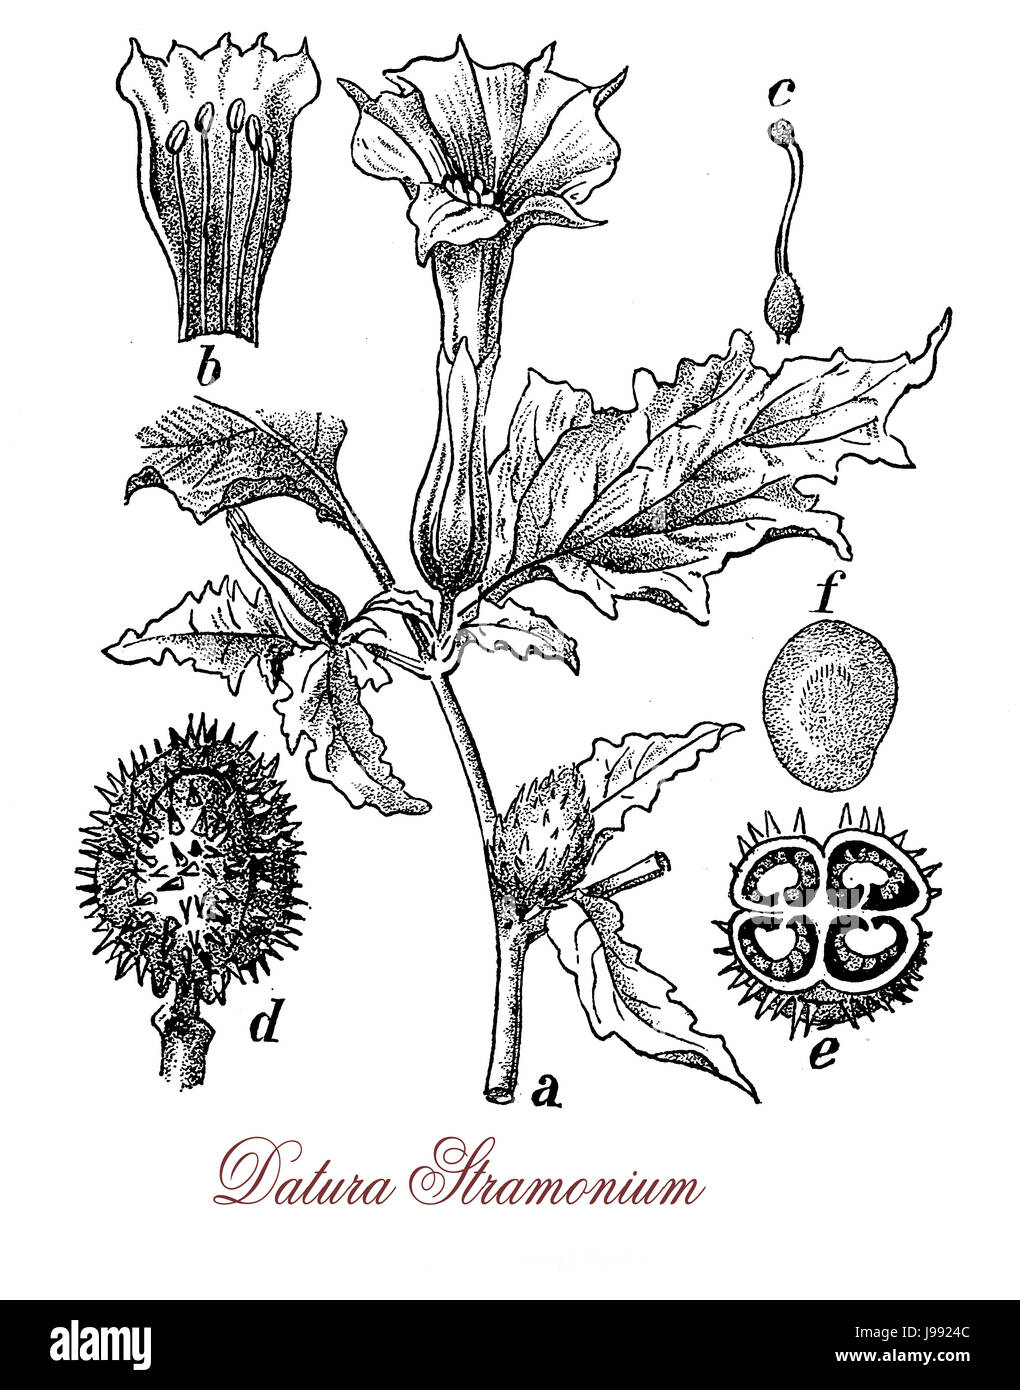 Vintage illustration of Datura stramonium with trumpet shaped flowers, used in traditional medicine to relieve asthma. It is also hallucinogenic and deliriant, toxic in quantity. Stock Photo